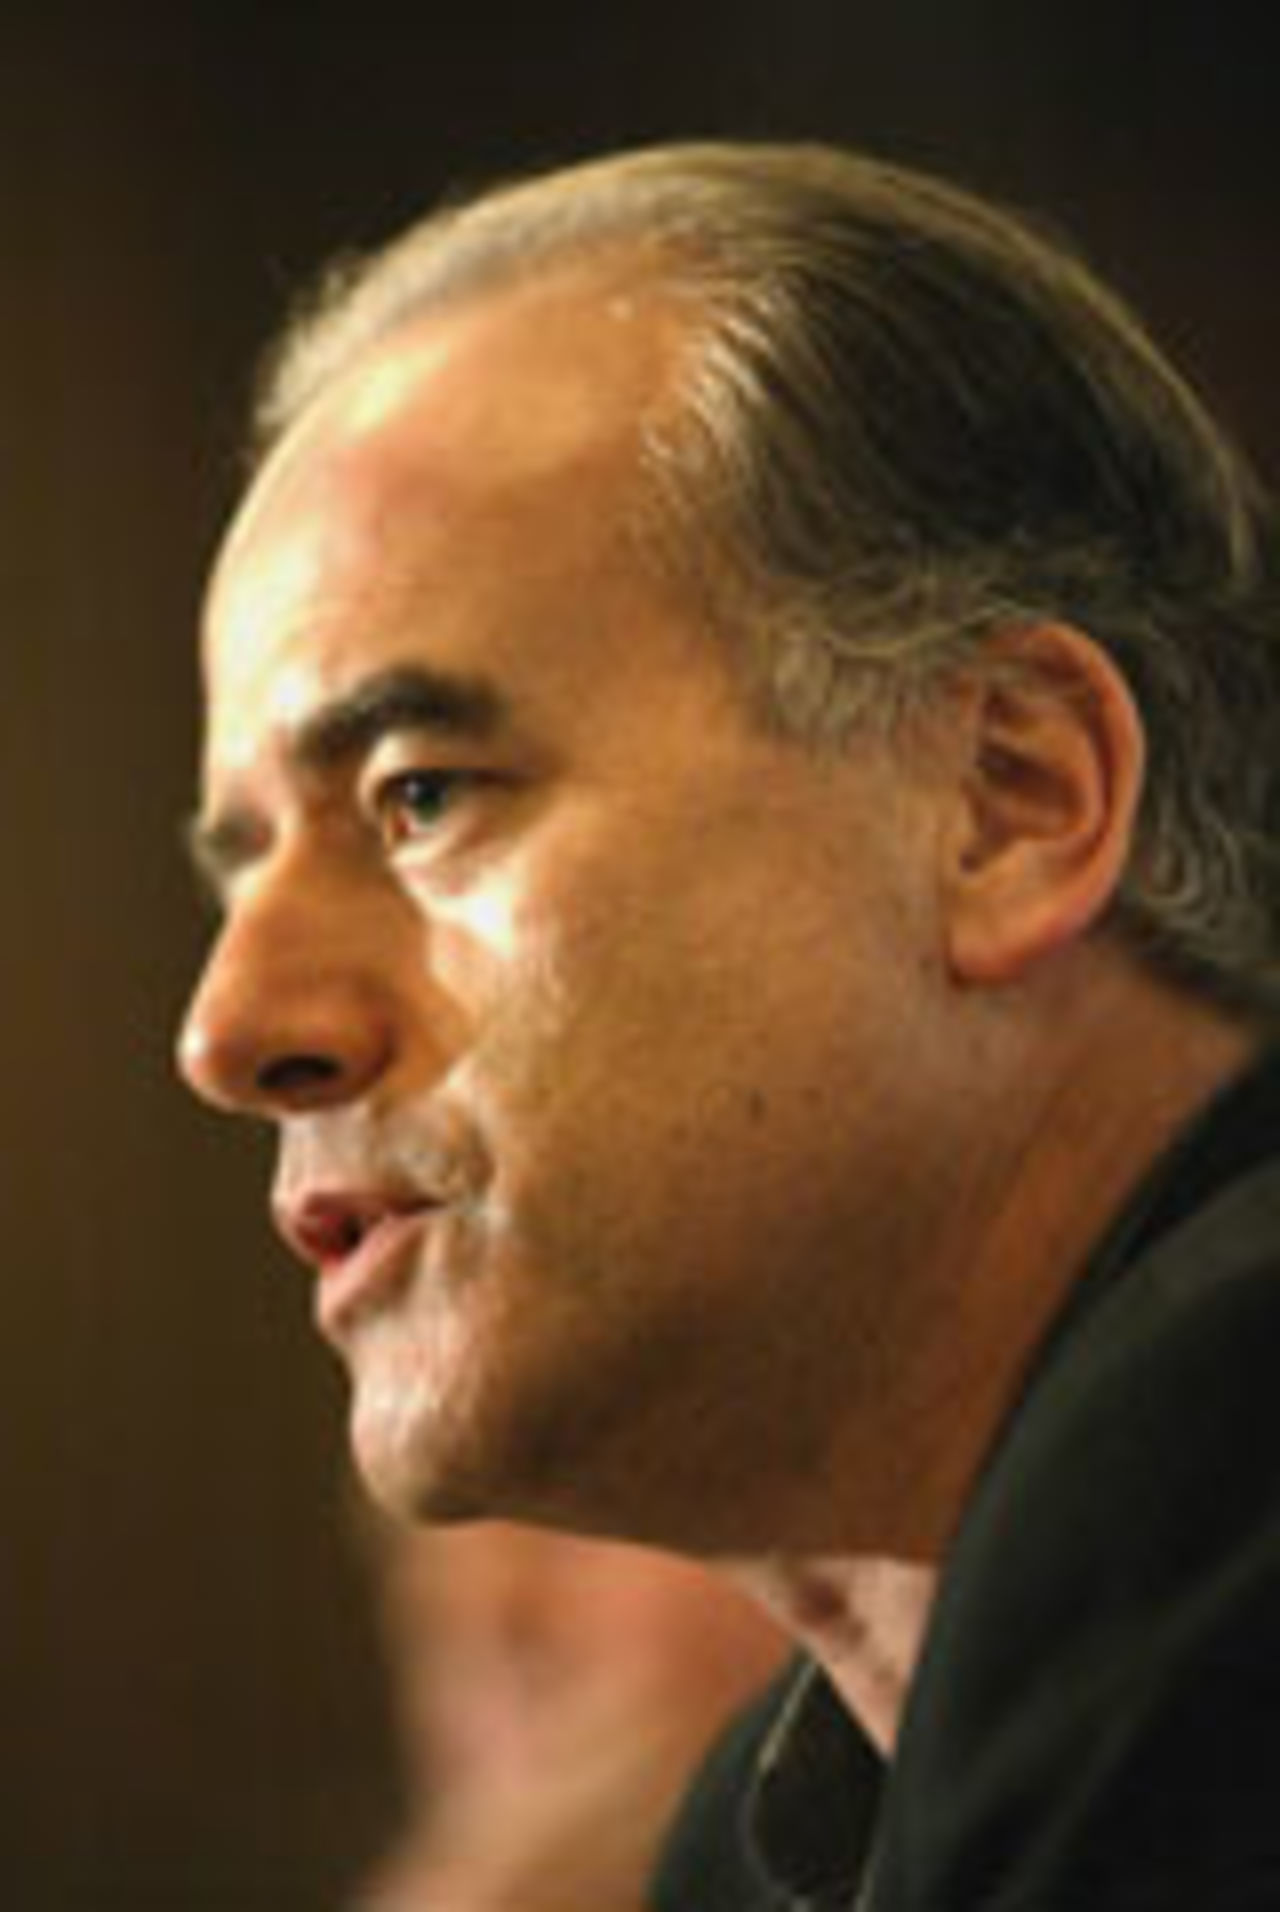 Tim Lamb, former chief executive of the ECB, October 4 2004